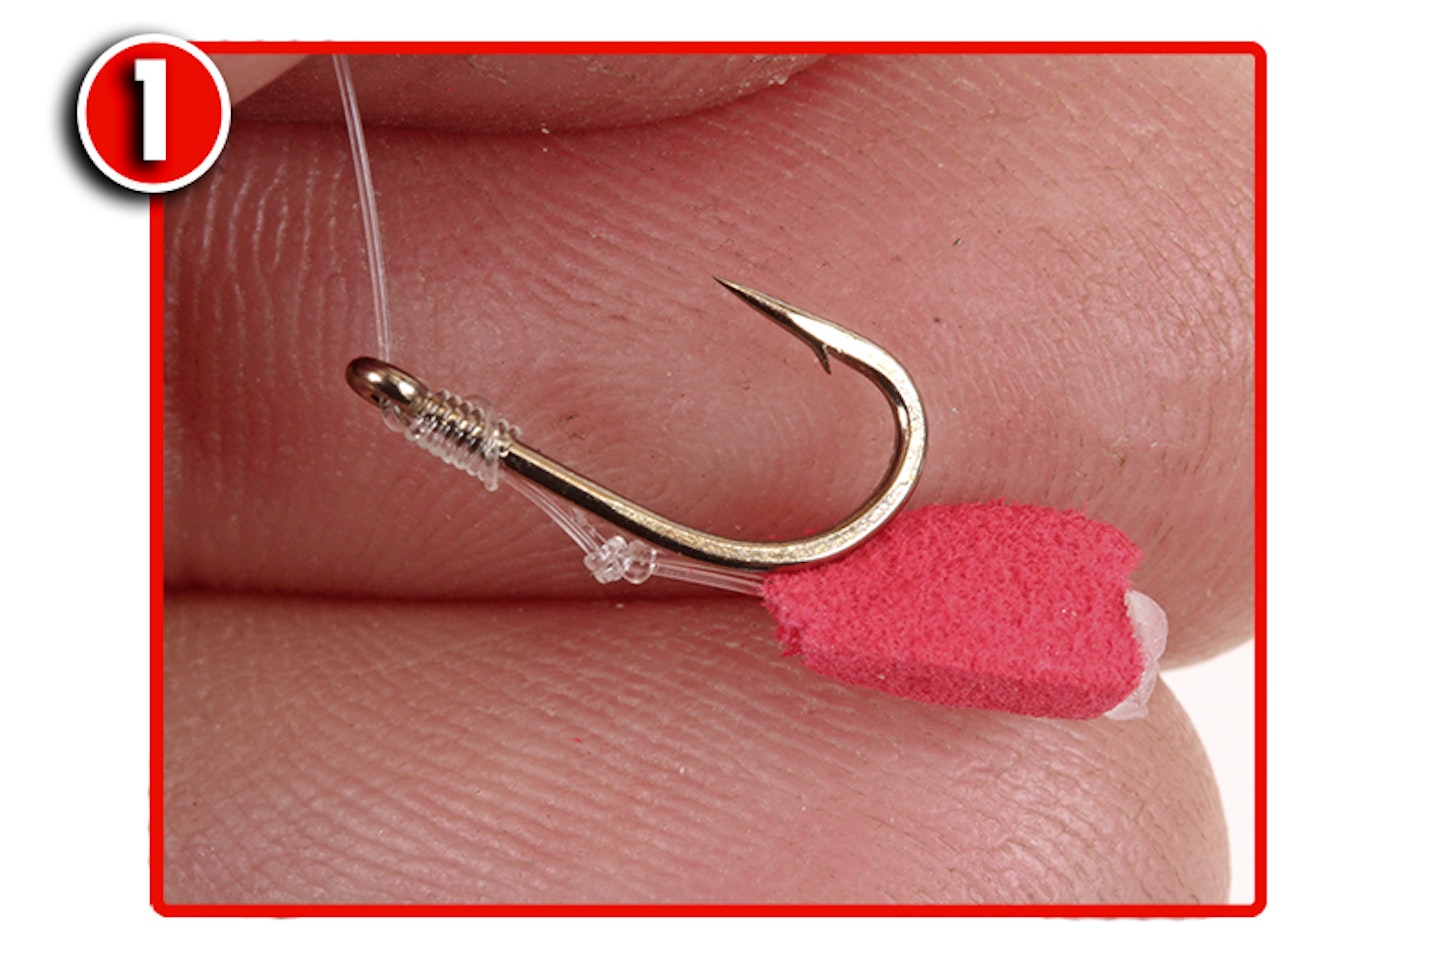 Tie a size 10 forged hook to a short length of 8lb fluorocarbon using a knotless knot and attach a slither of red rig foam to the hair 